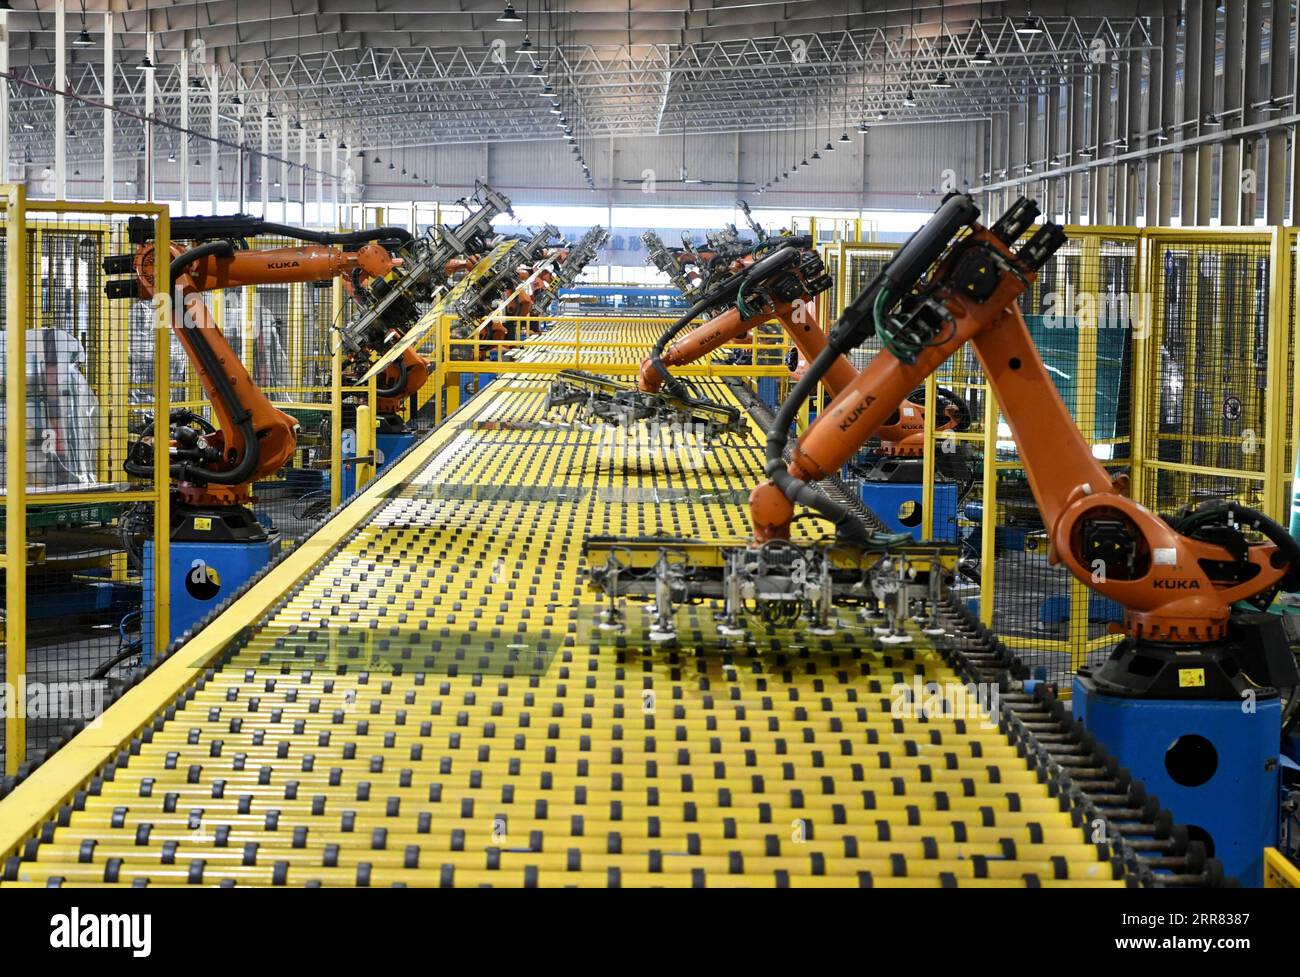 210415 -- WASHINGTON, April 15, 2021 -- Robots operate on a production line at an automotive glass workshop of the Fuyao Glass Industry Group Co., Ltd. in Fuqing City of Fuzhou, southeast China s Fujian Province, Jan. 12, 2021. TO GO WITH XINHUA HEADLINES OF APRIL 15, 2021  IMF CHIEF-INTERVIEW-GREEN AND INCLUSIVE RECOVERY JiangxKehong PUBLICATIONxNOTxINxCHN Stock Photo